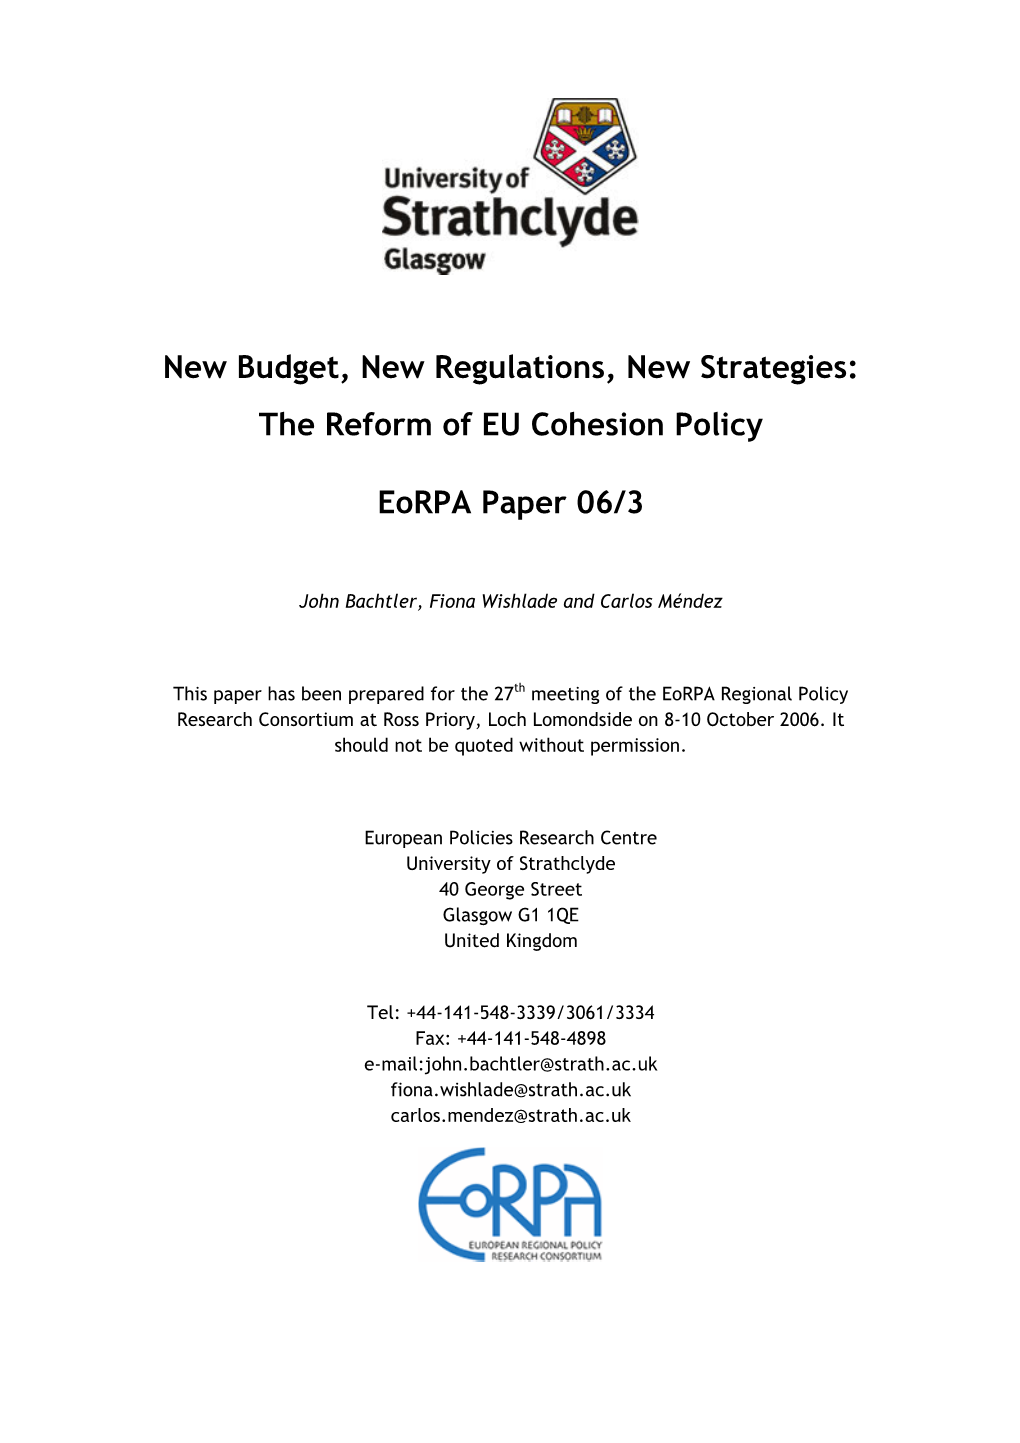 The Reform of EU Cohesion Policy Eorpa